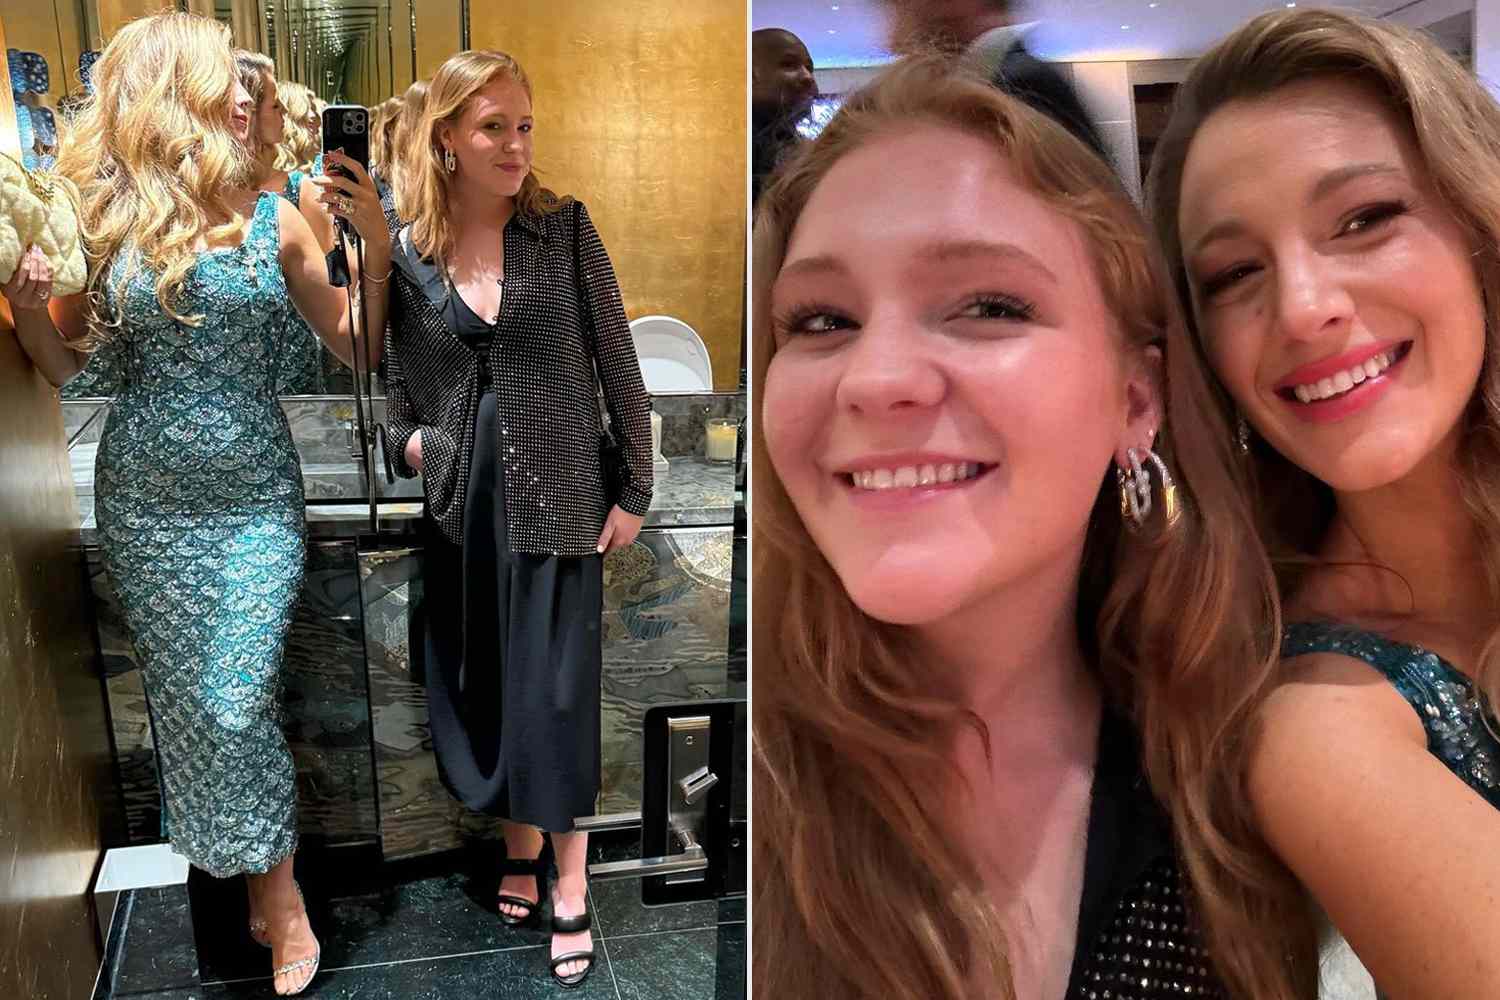 Blake Lively Took Her Niece Kate, 19, on a Tiffany & Co. Date Night — and They Were Both 'So Well Sparkled'